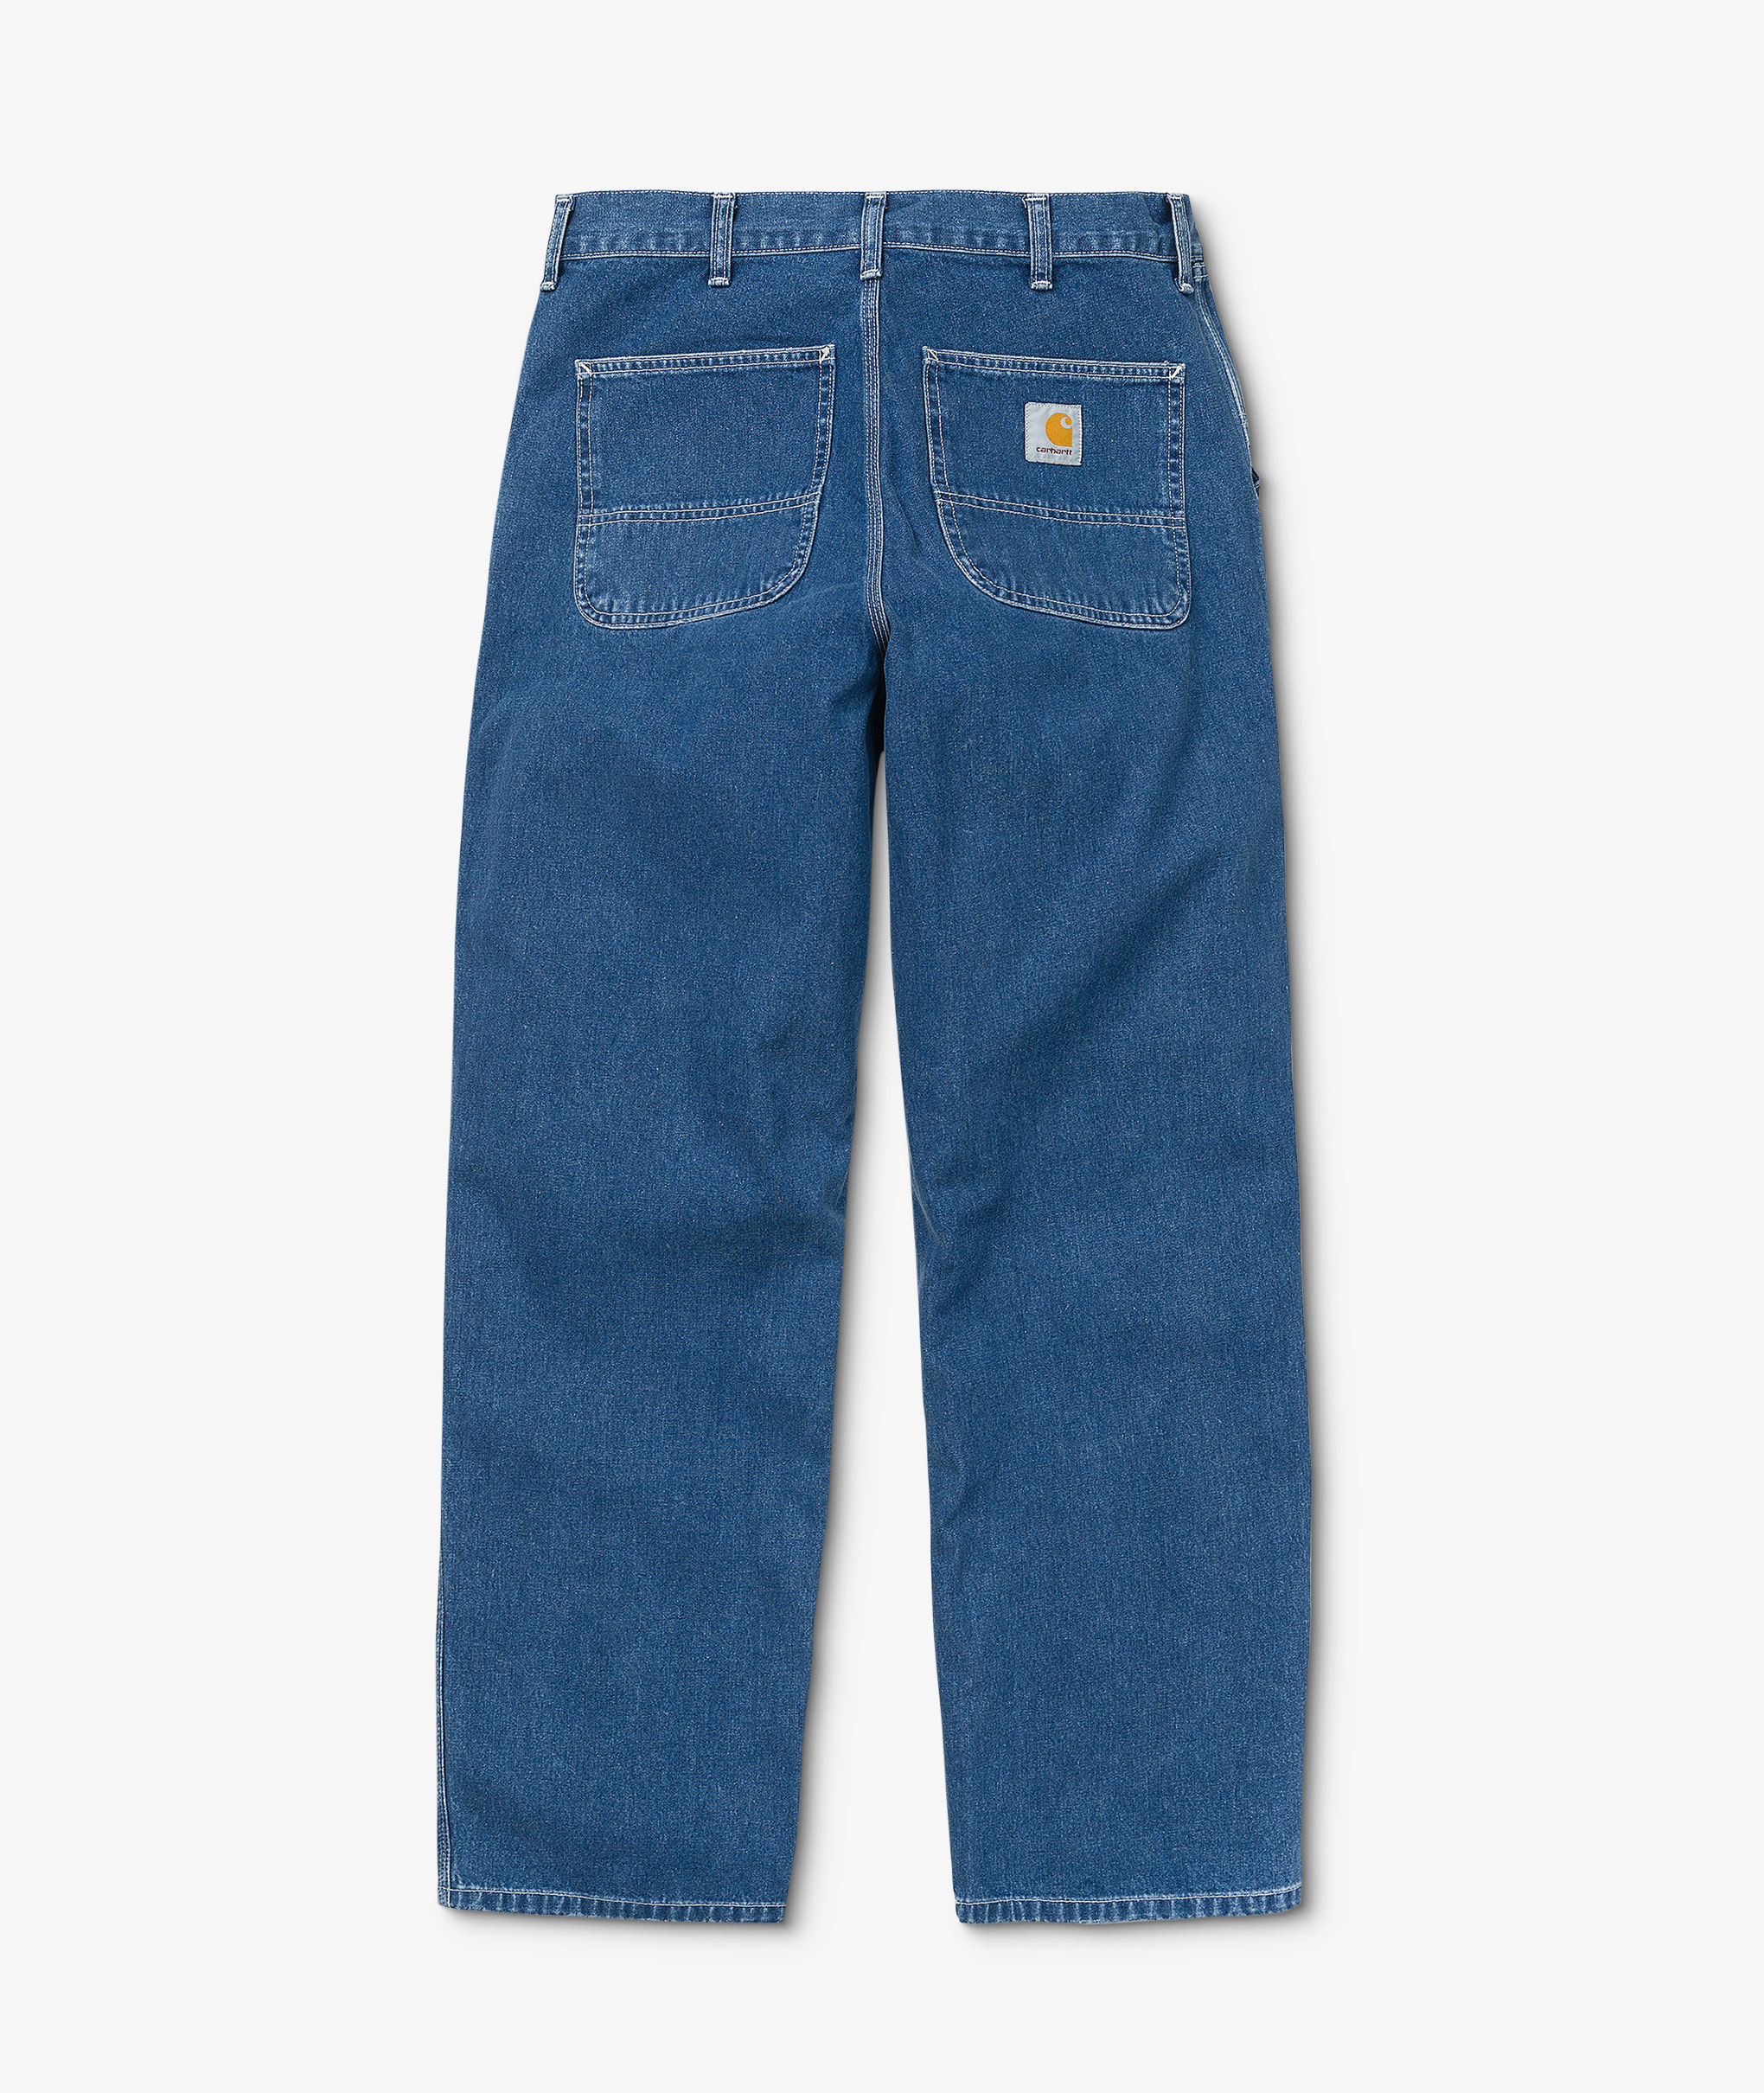 Norse Store  Shipping Worldwide - Carhartt WIP Simple Pant - BLUE STONE  WASHED